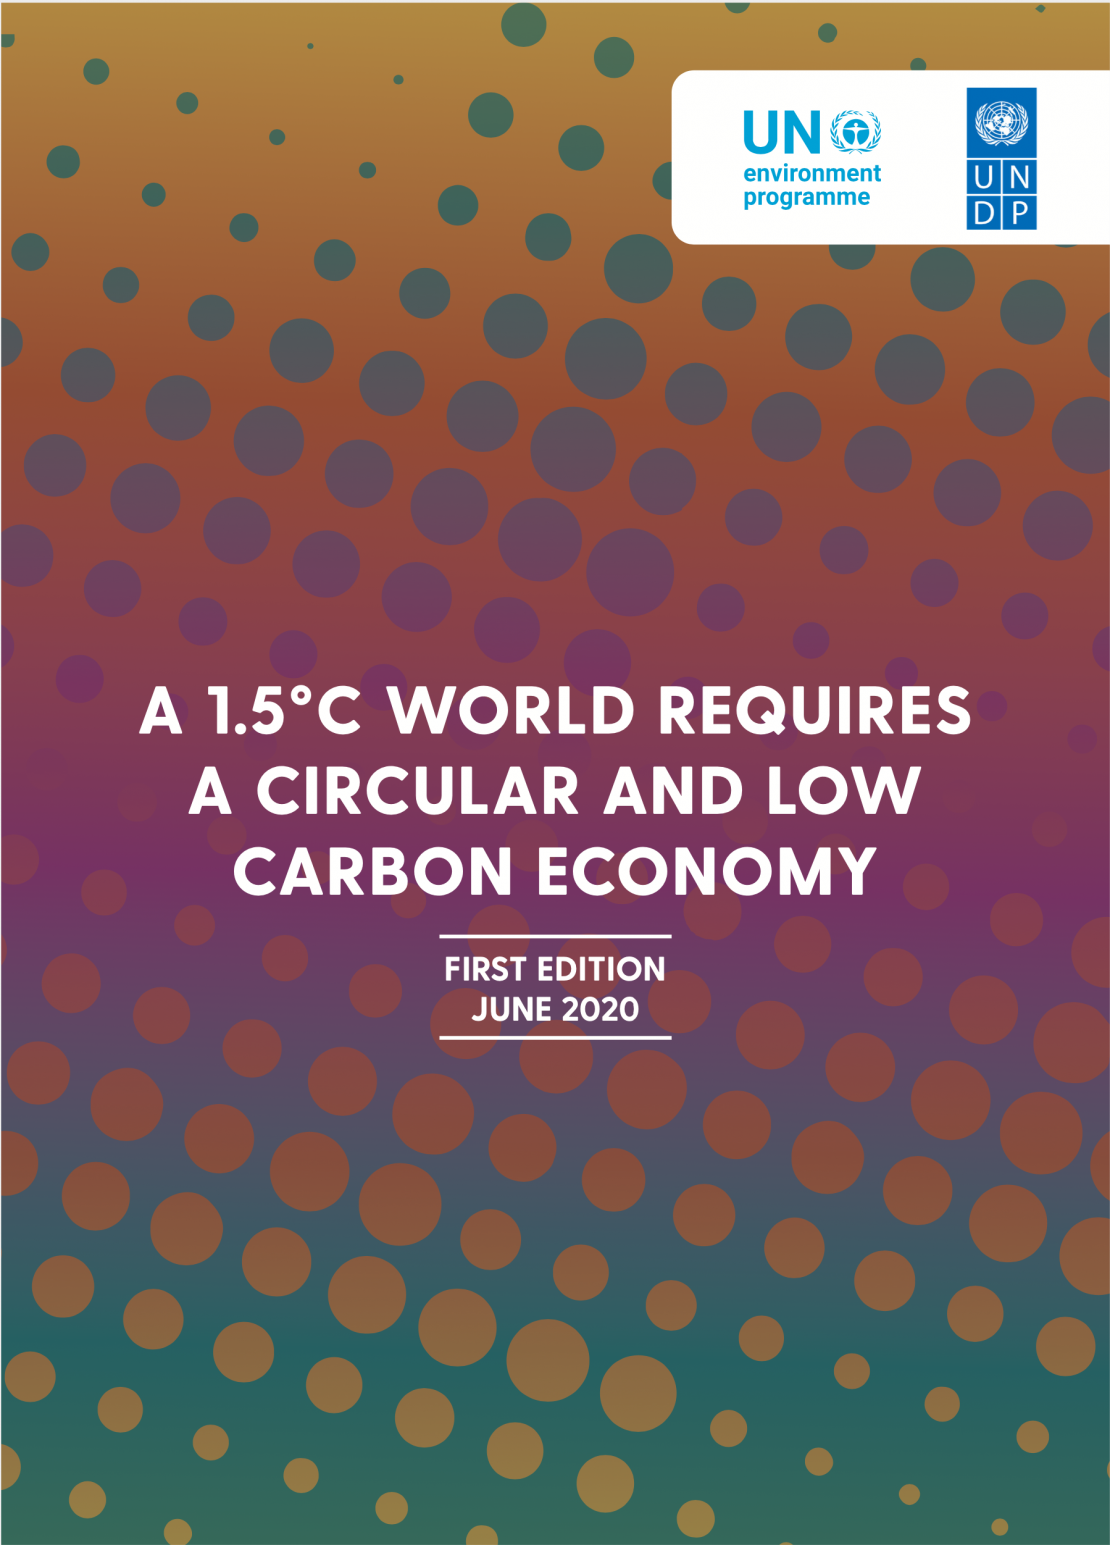 A 1.5°C World Requires a Circular and Low Carbon Economy